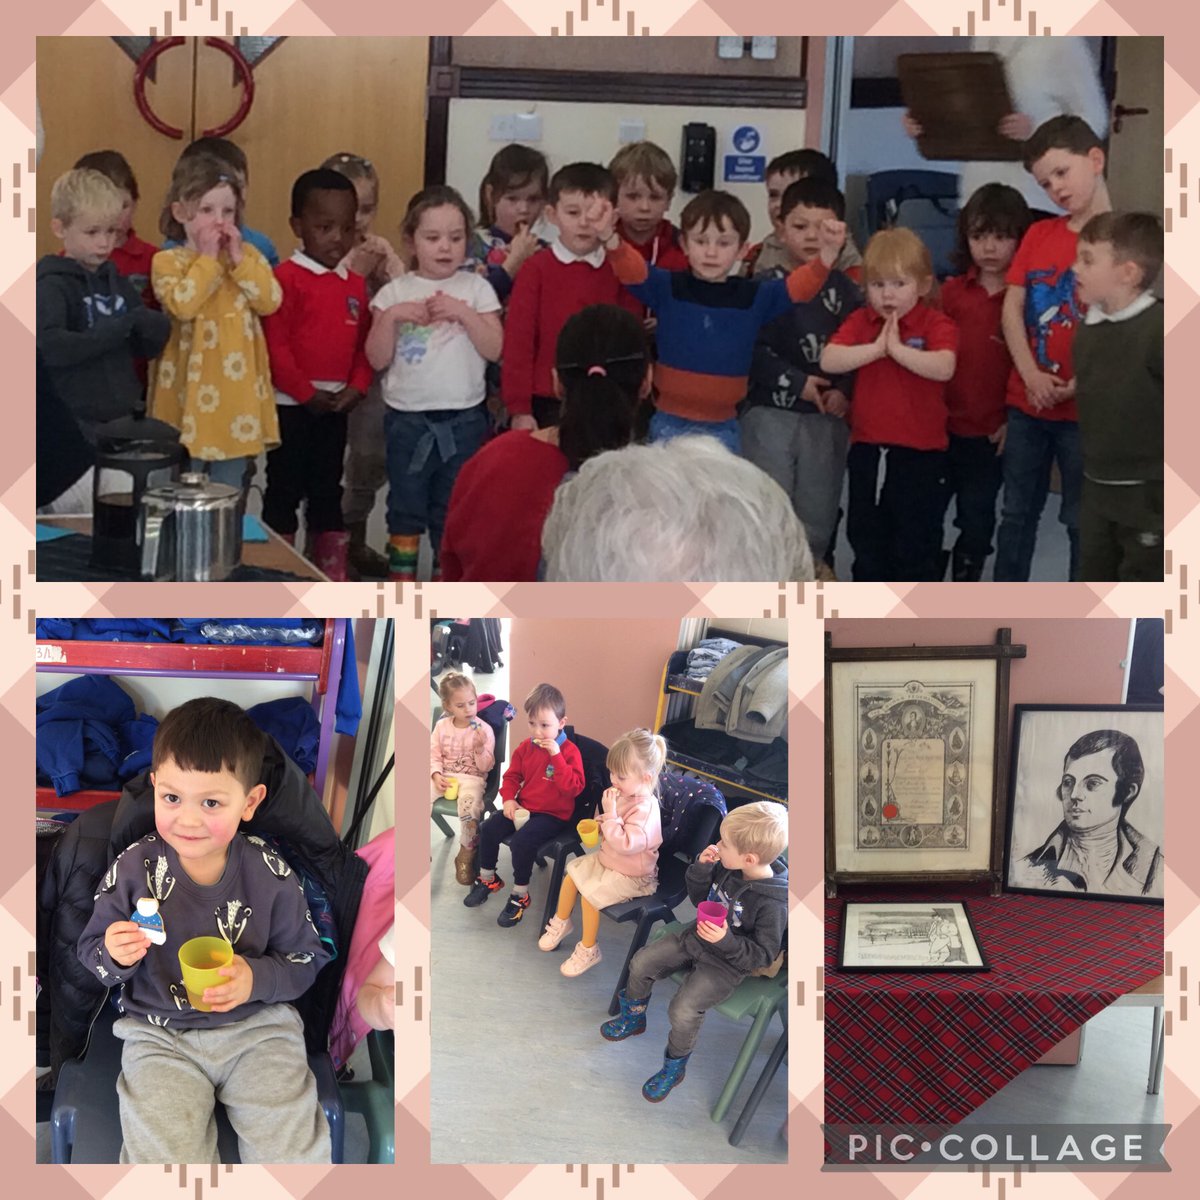 Today we were invited to The Hive to sing some of the Scottish songs we have been practicing. Before singing we were treated to a biscuit and a drink of juice #Burns #Community #EffectiveContributors #BringingGenerationsTogether